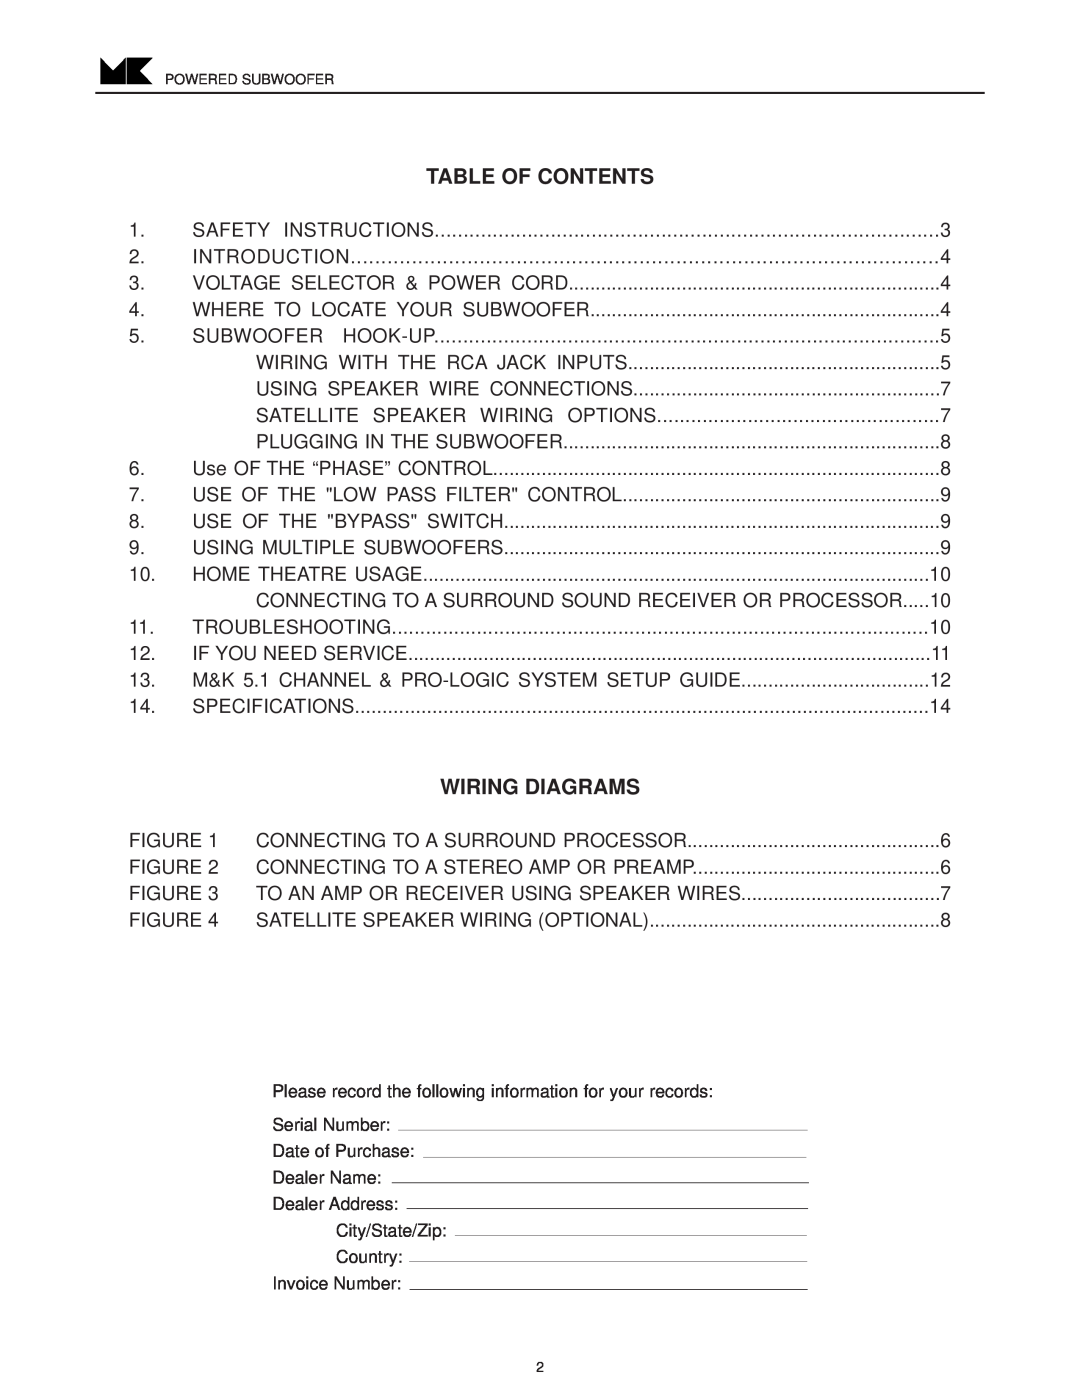 MK Sound VX-1250 operation manual Table Of Contents, Wiring Diagrams 